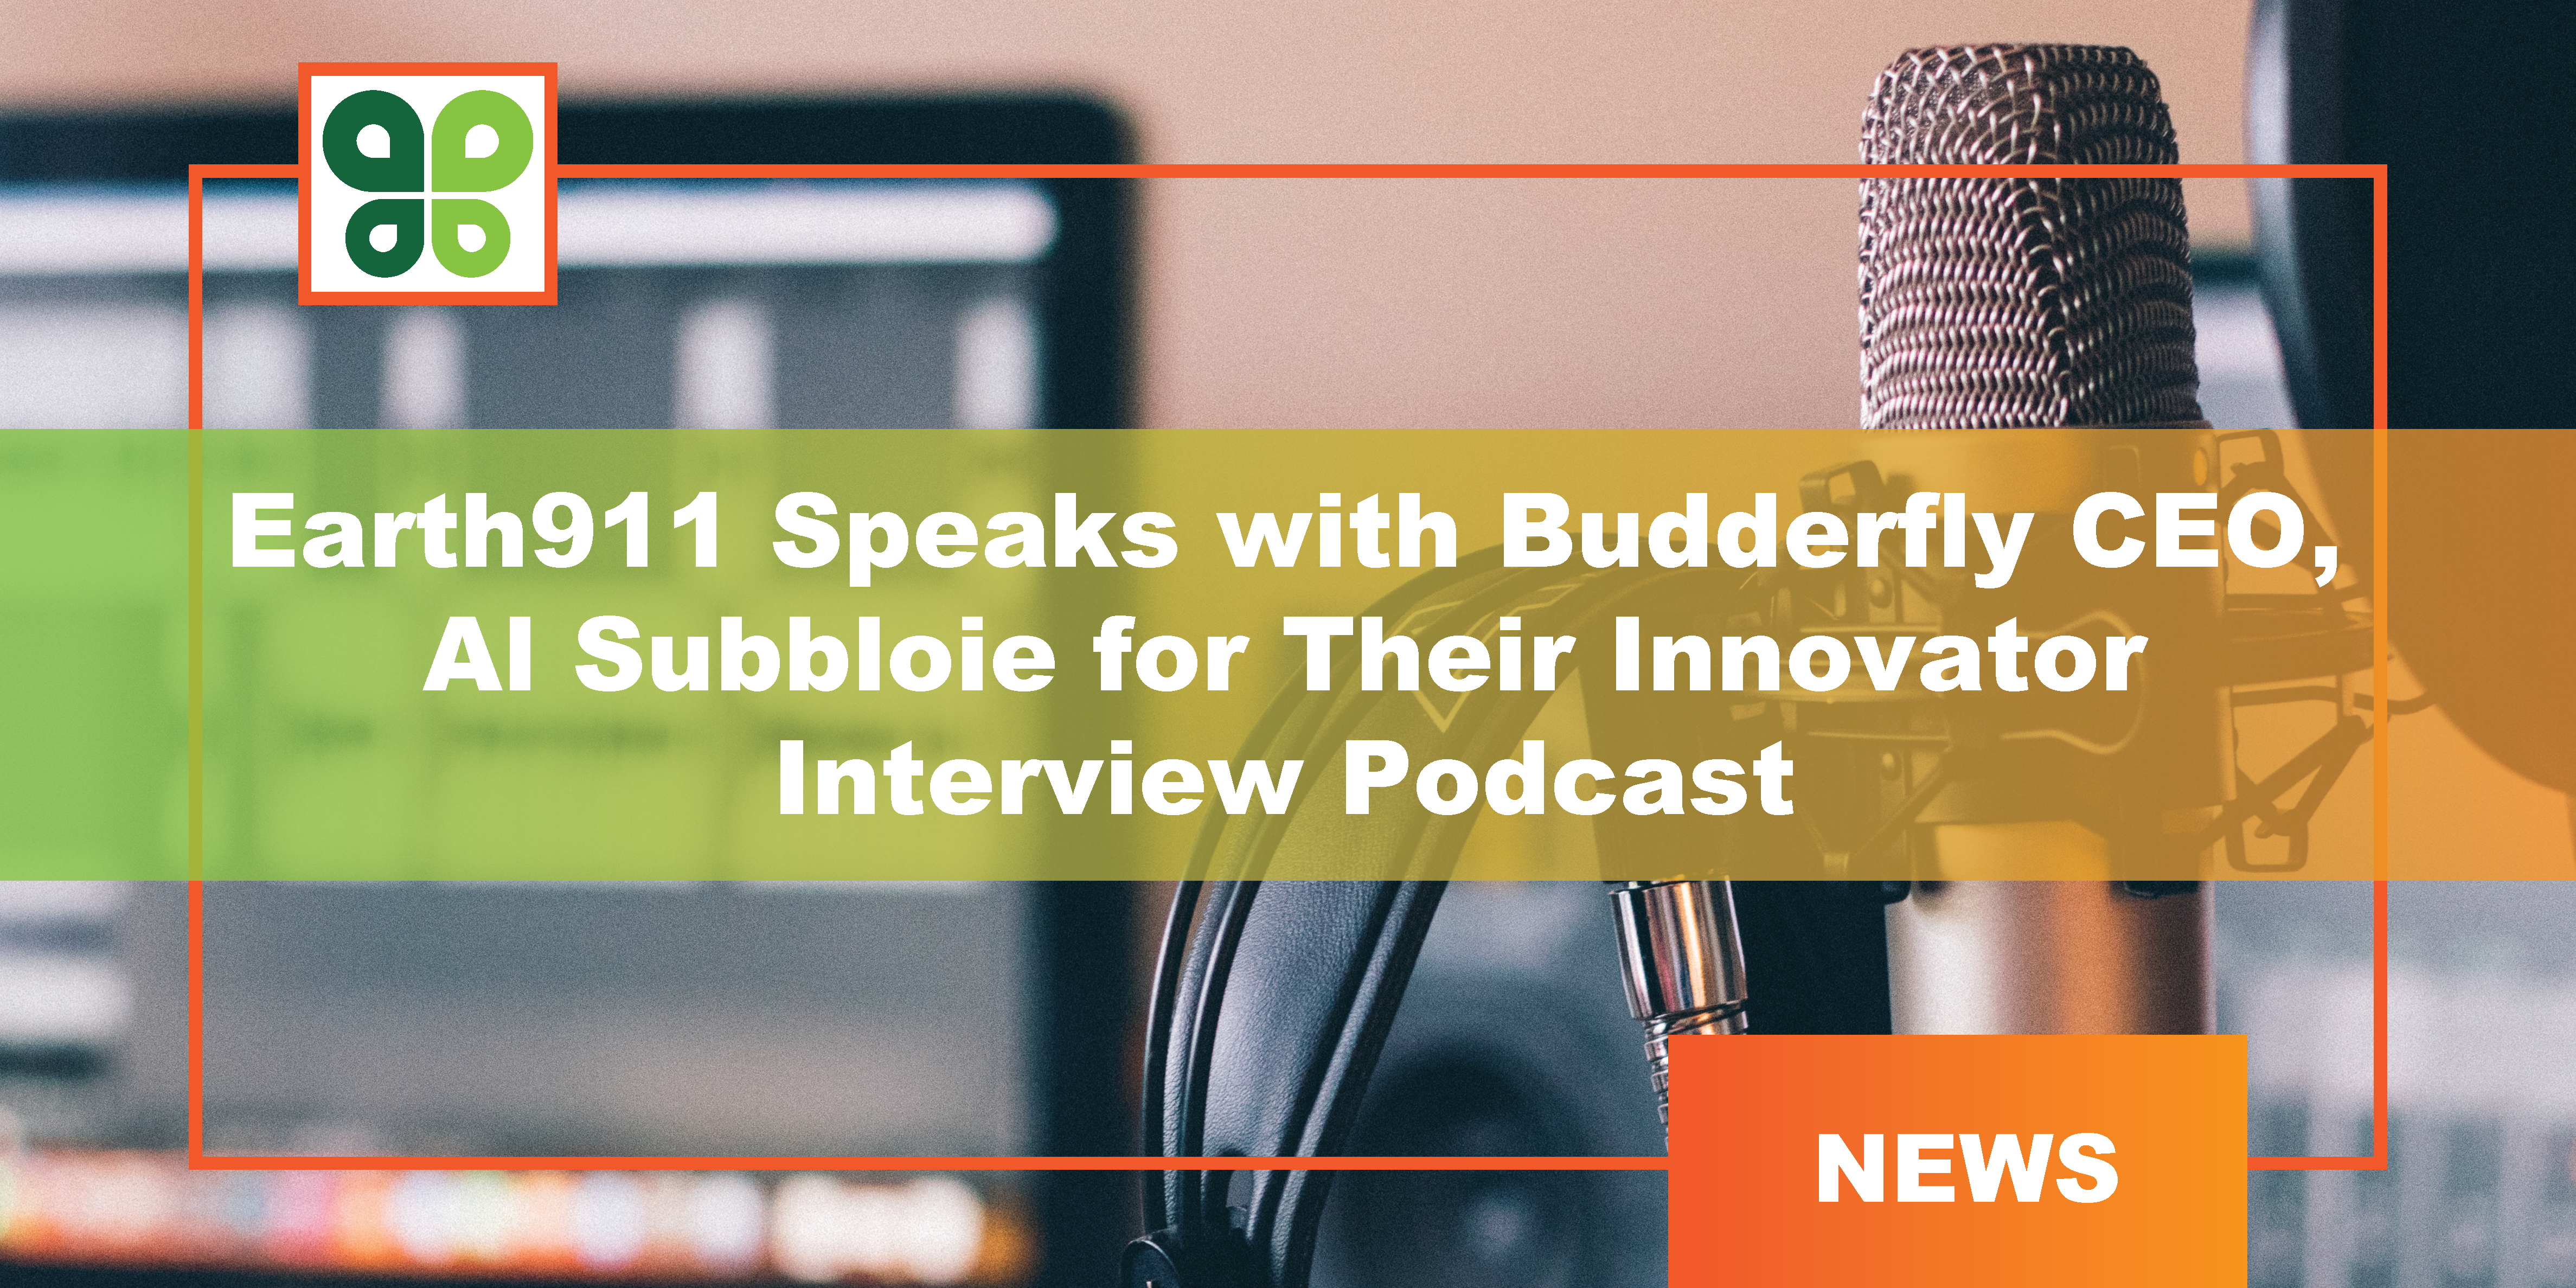 Earth911 Speaks with Budderfly CEO, Al Subbloie for their Innovator Interview Podcast